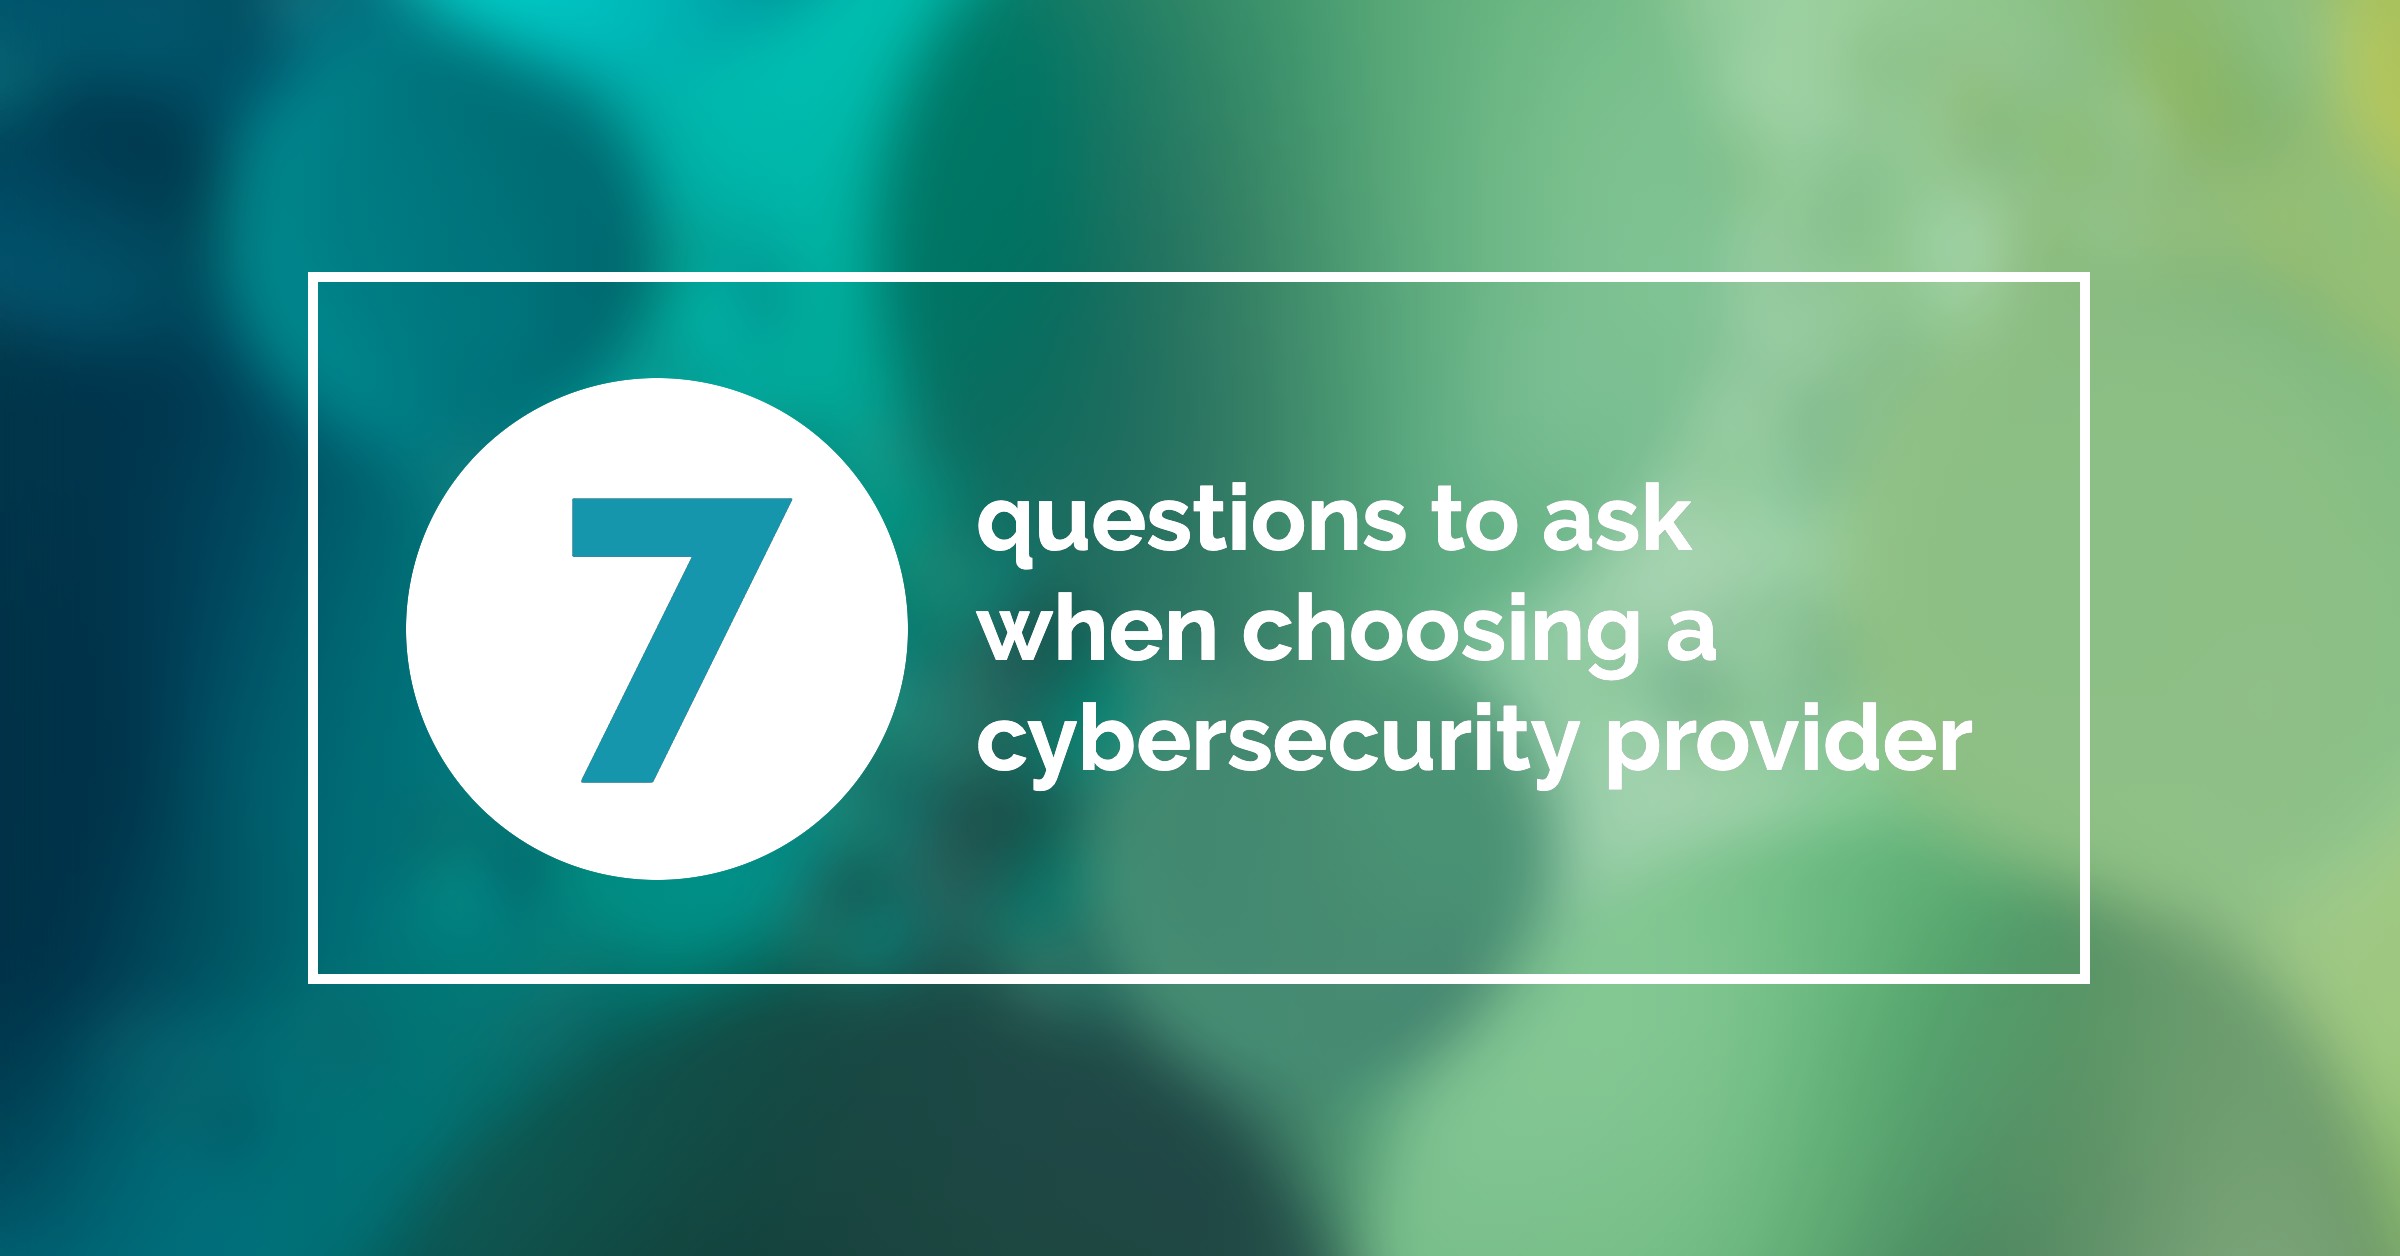 7-questions-cybersecurity-provider